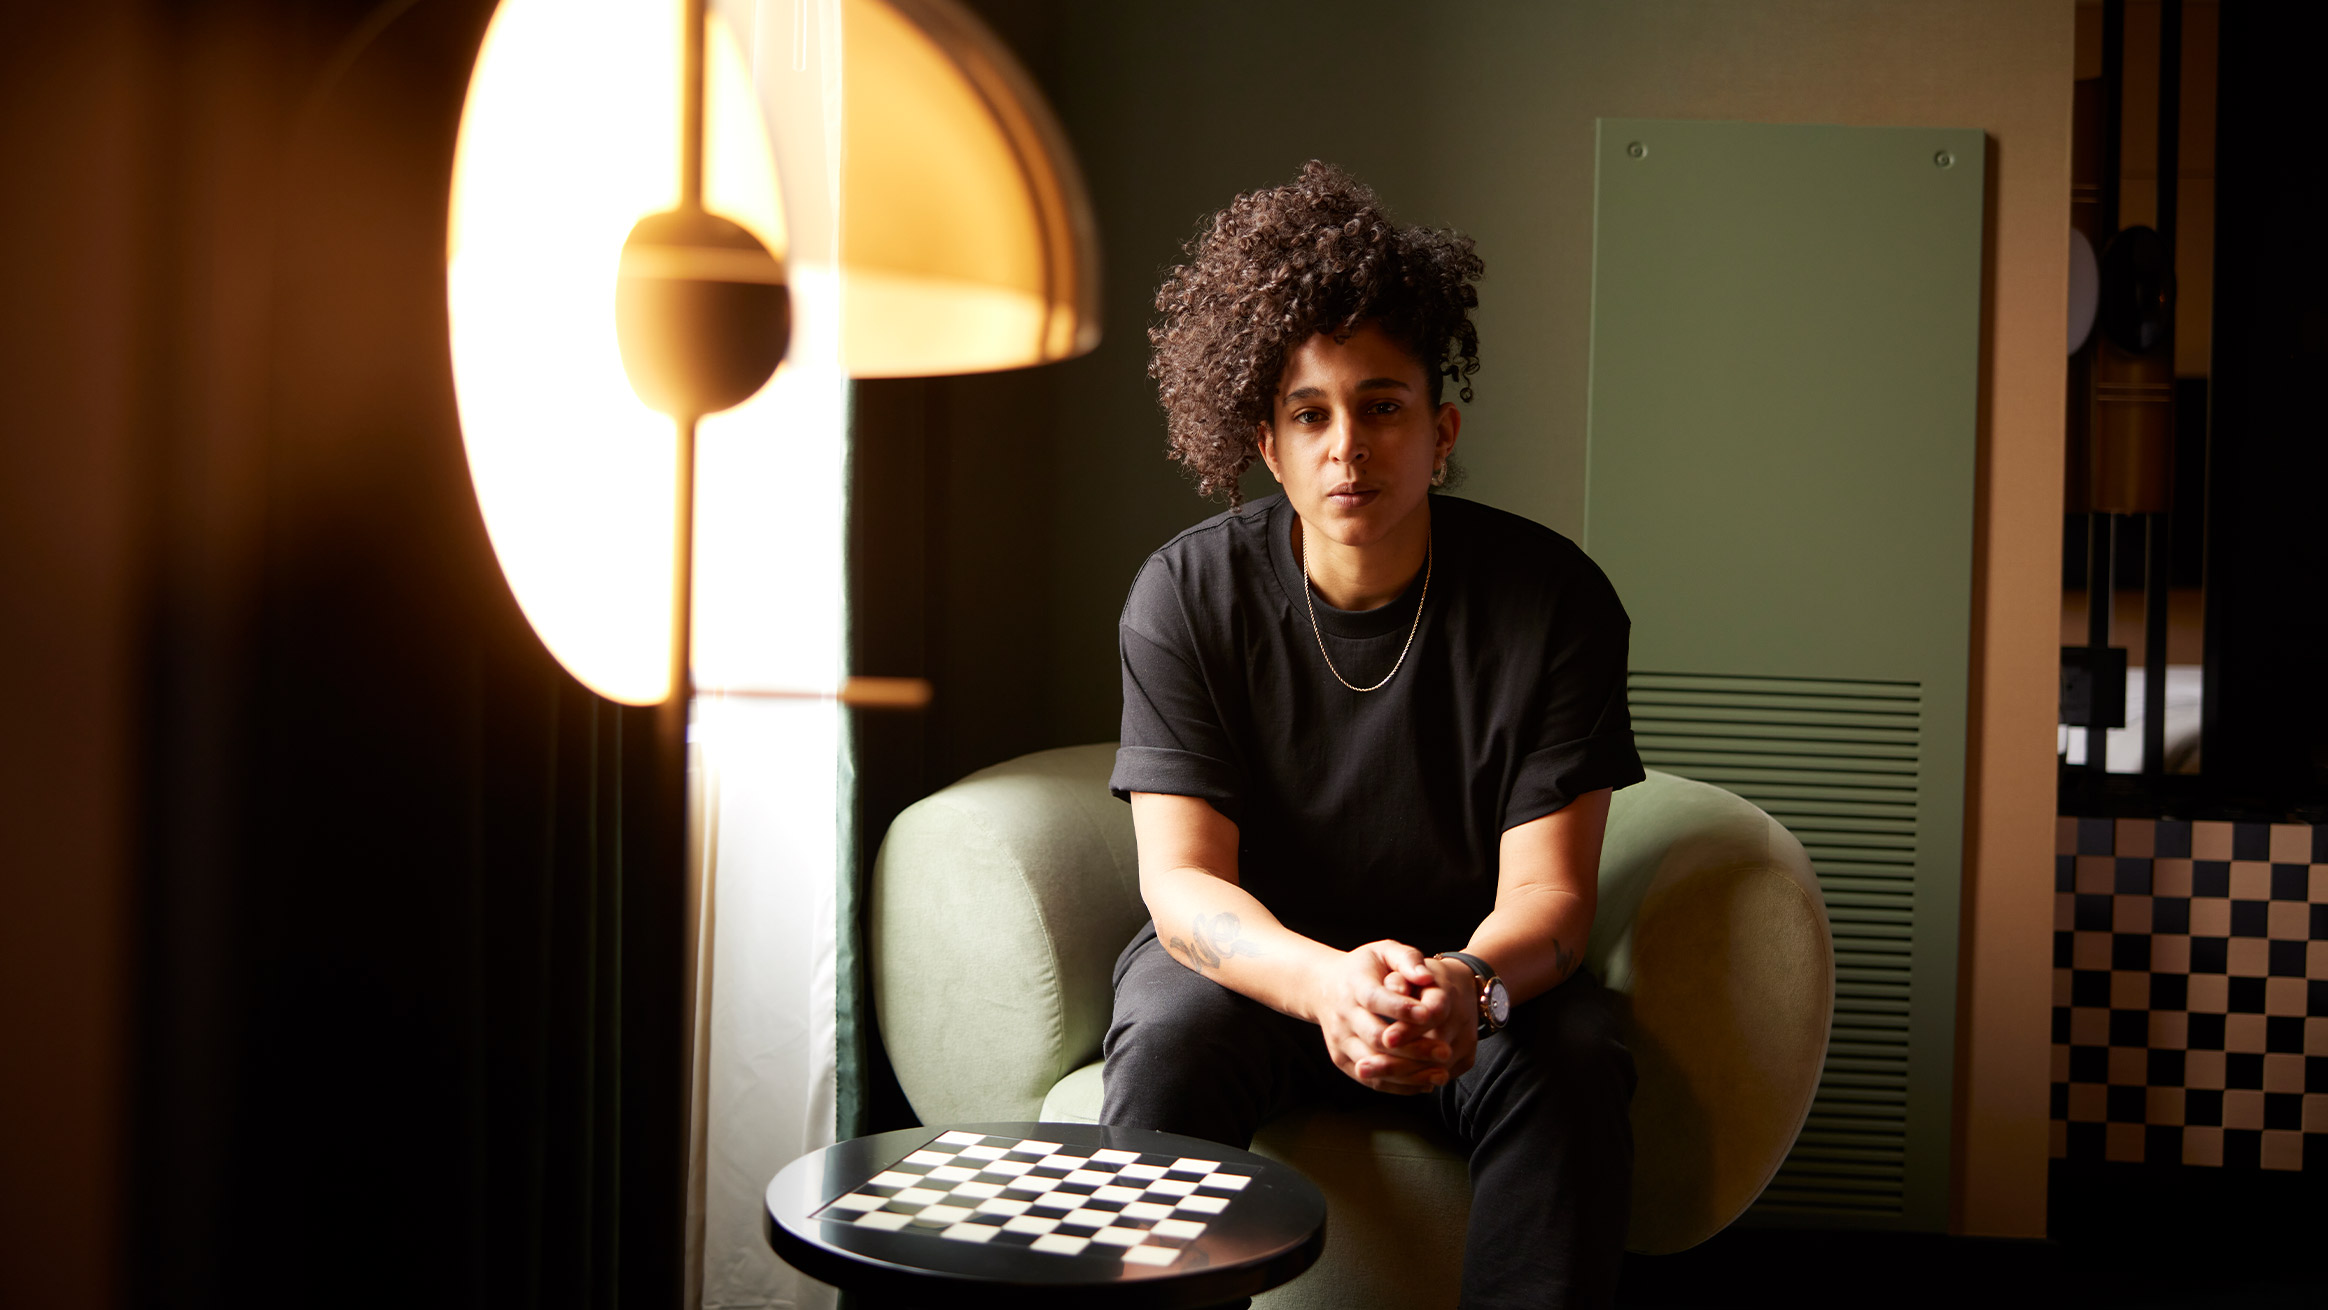 A person with curly hair sits confidently on a green sofa, facing the camera, in a stylishly decorated room with warm lighting and a modern chessboard on a table nearby.